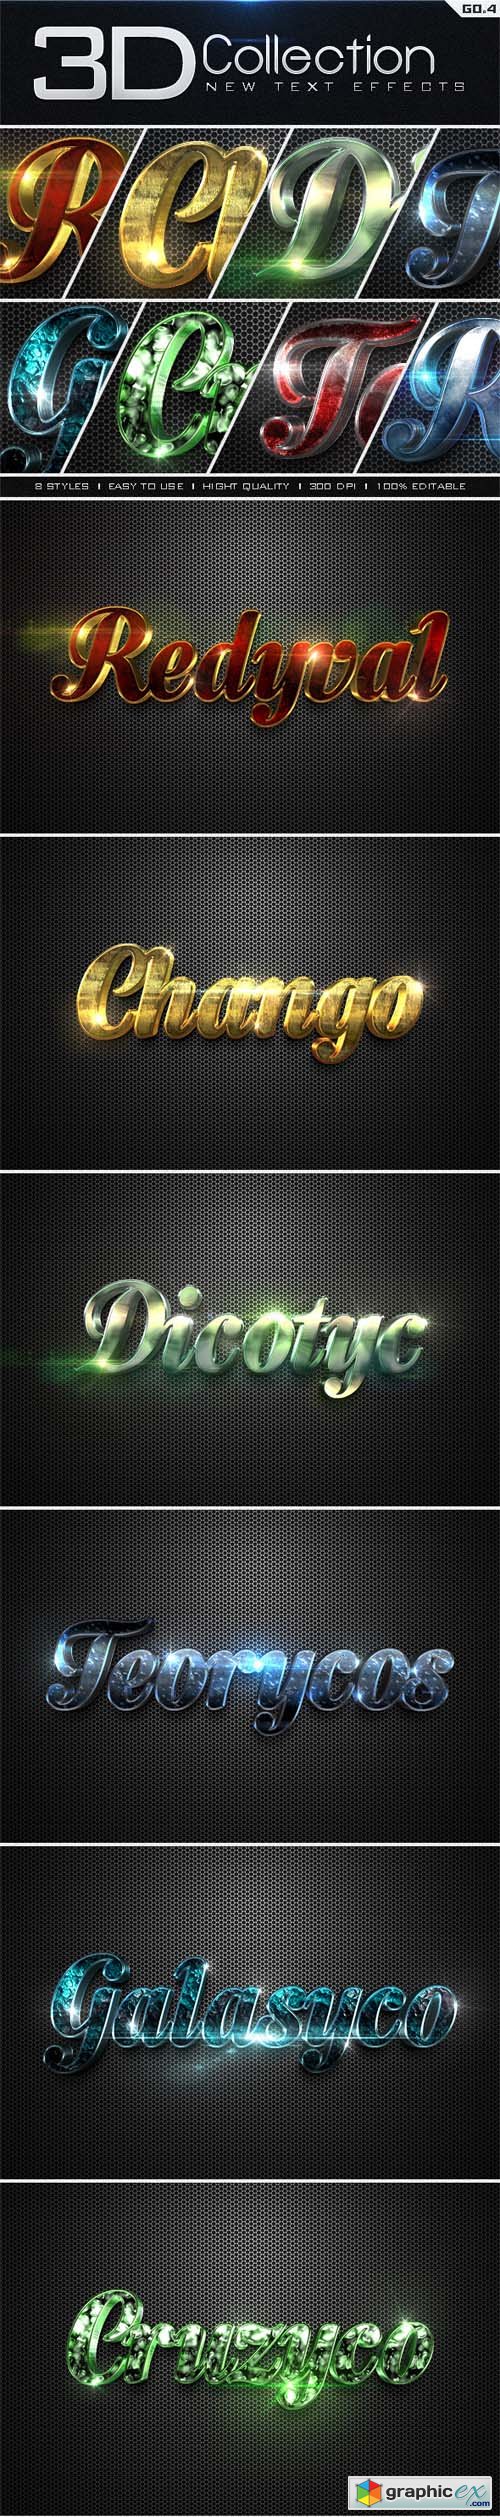 New 3D Collection Text Effects GO.4